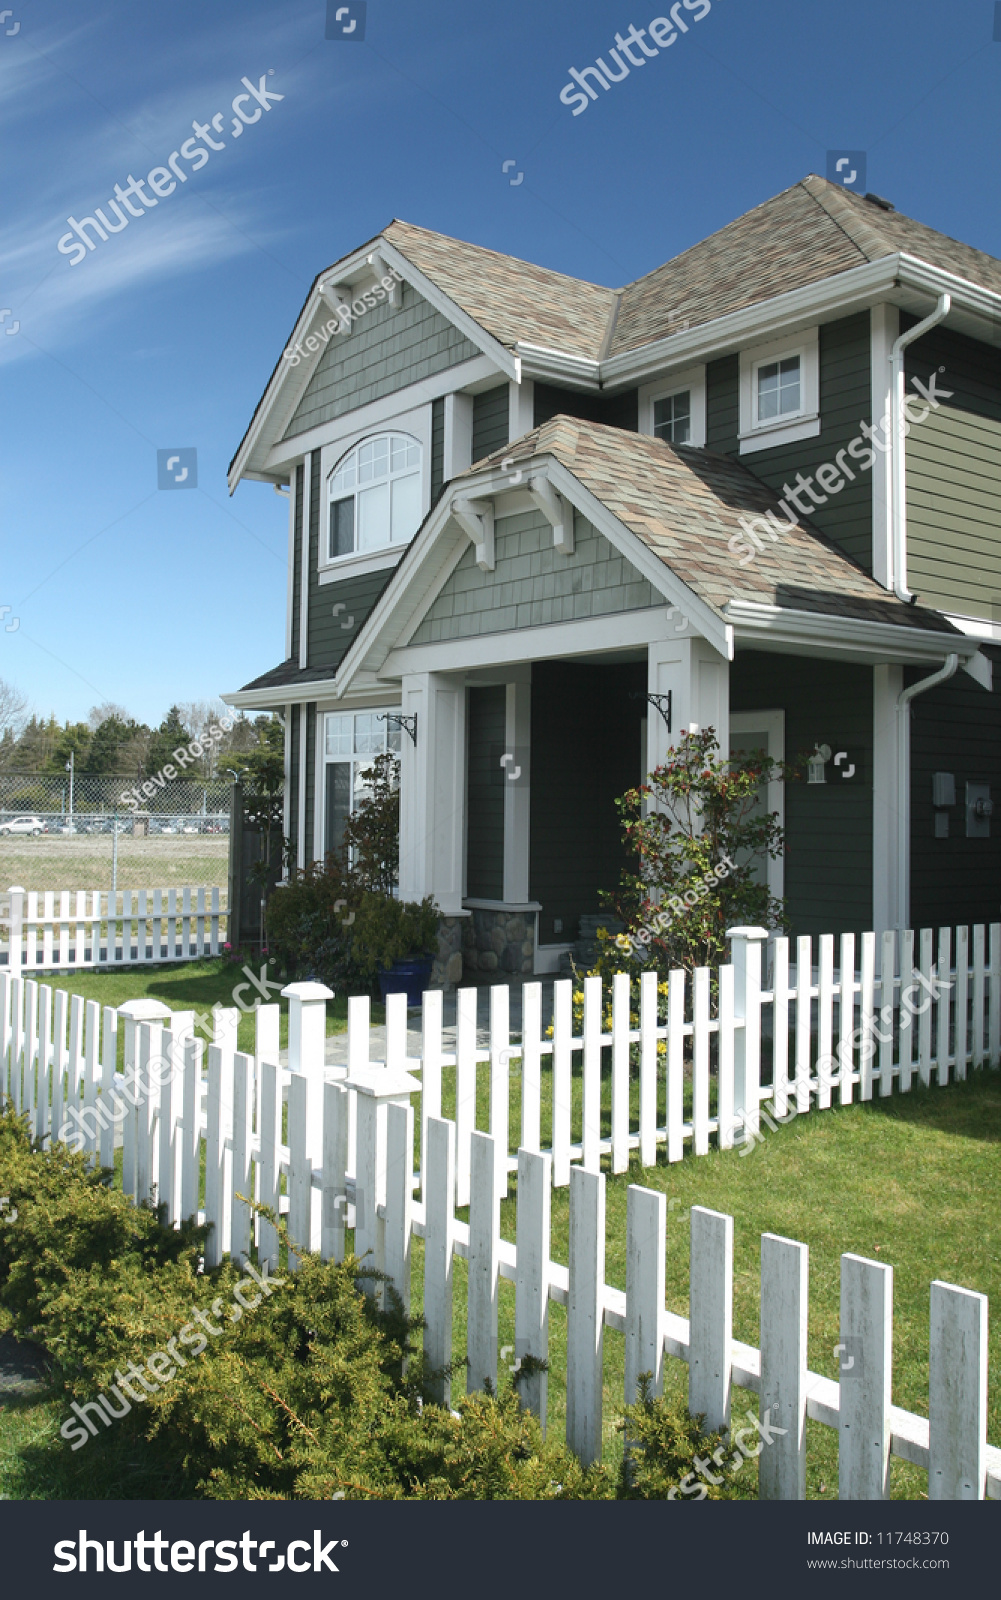 Beautiful Home White Picket Fence Stock Photo 11748370 : Shutterstock